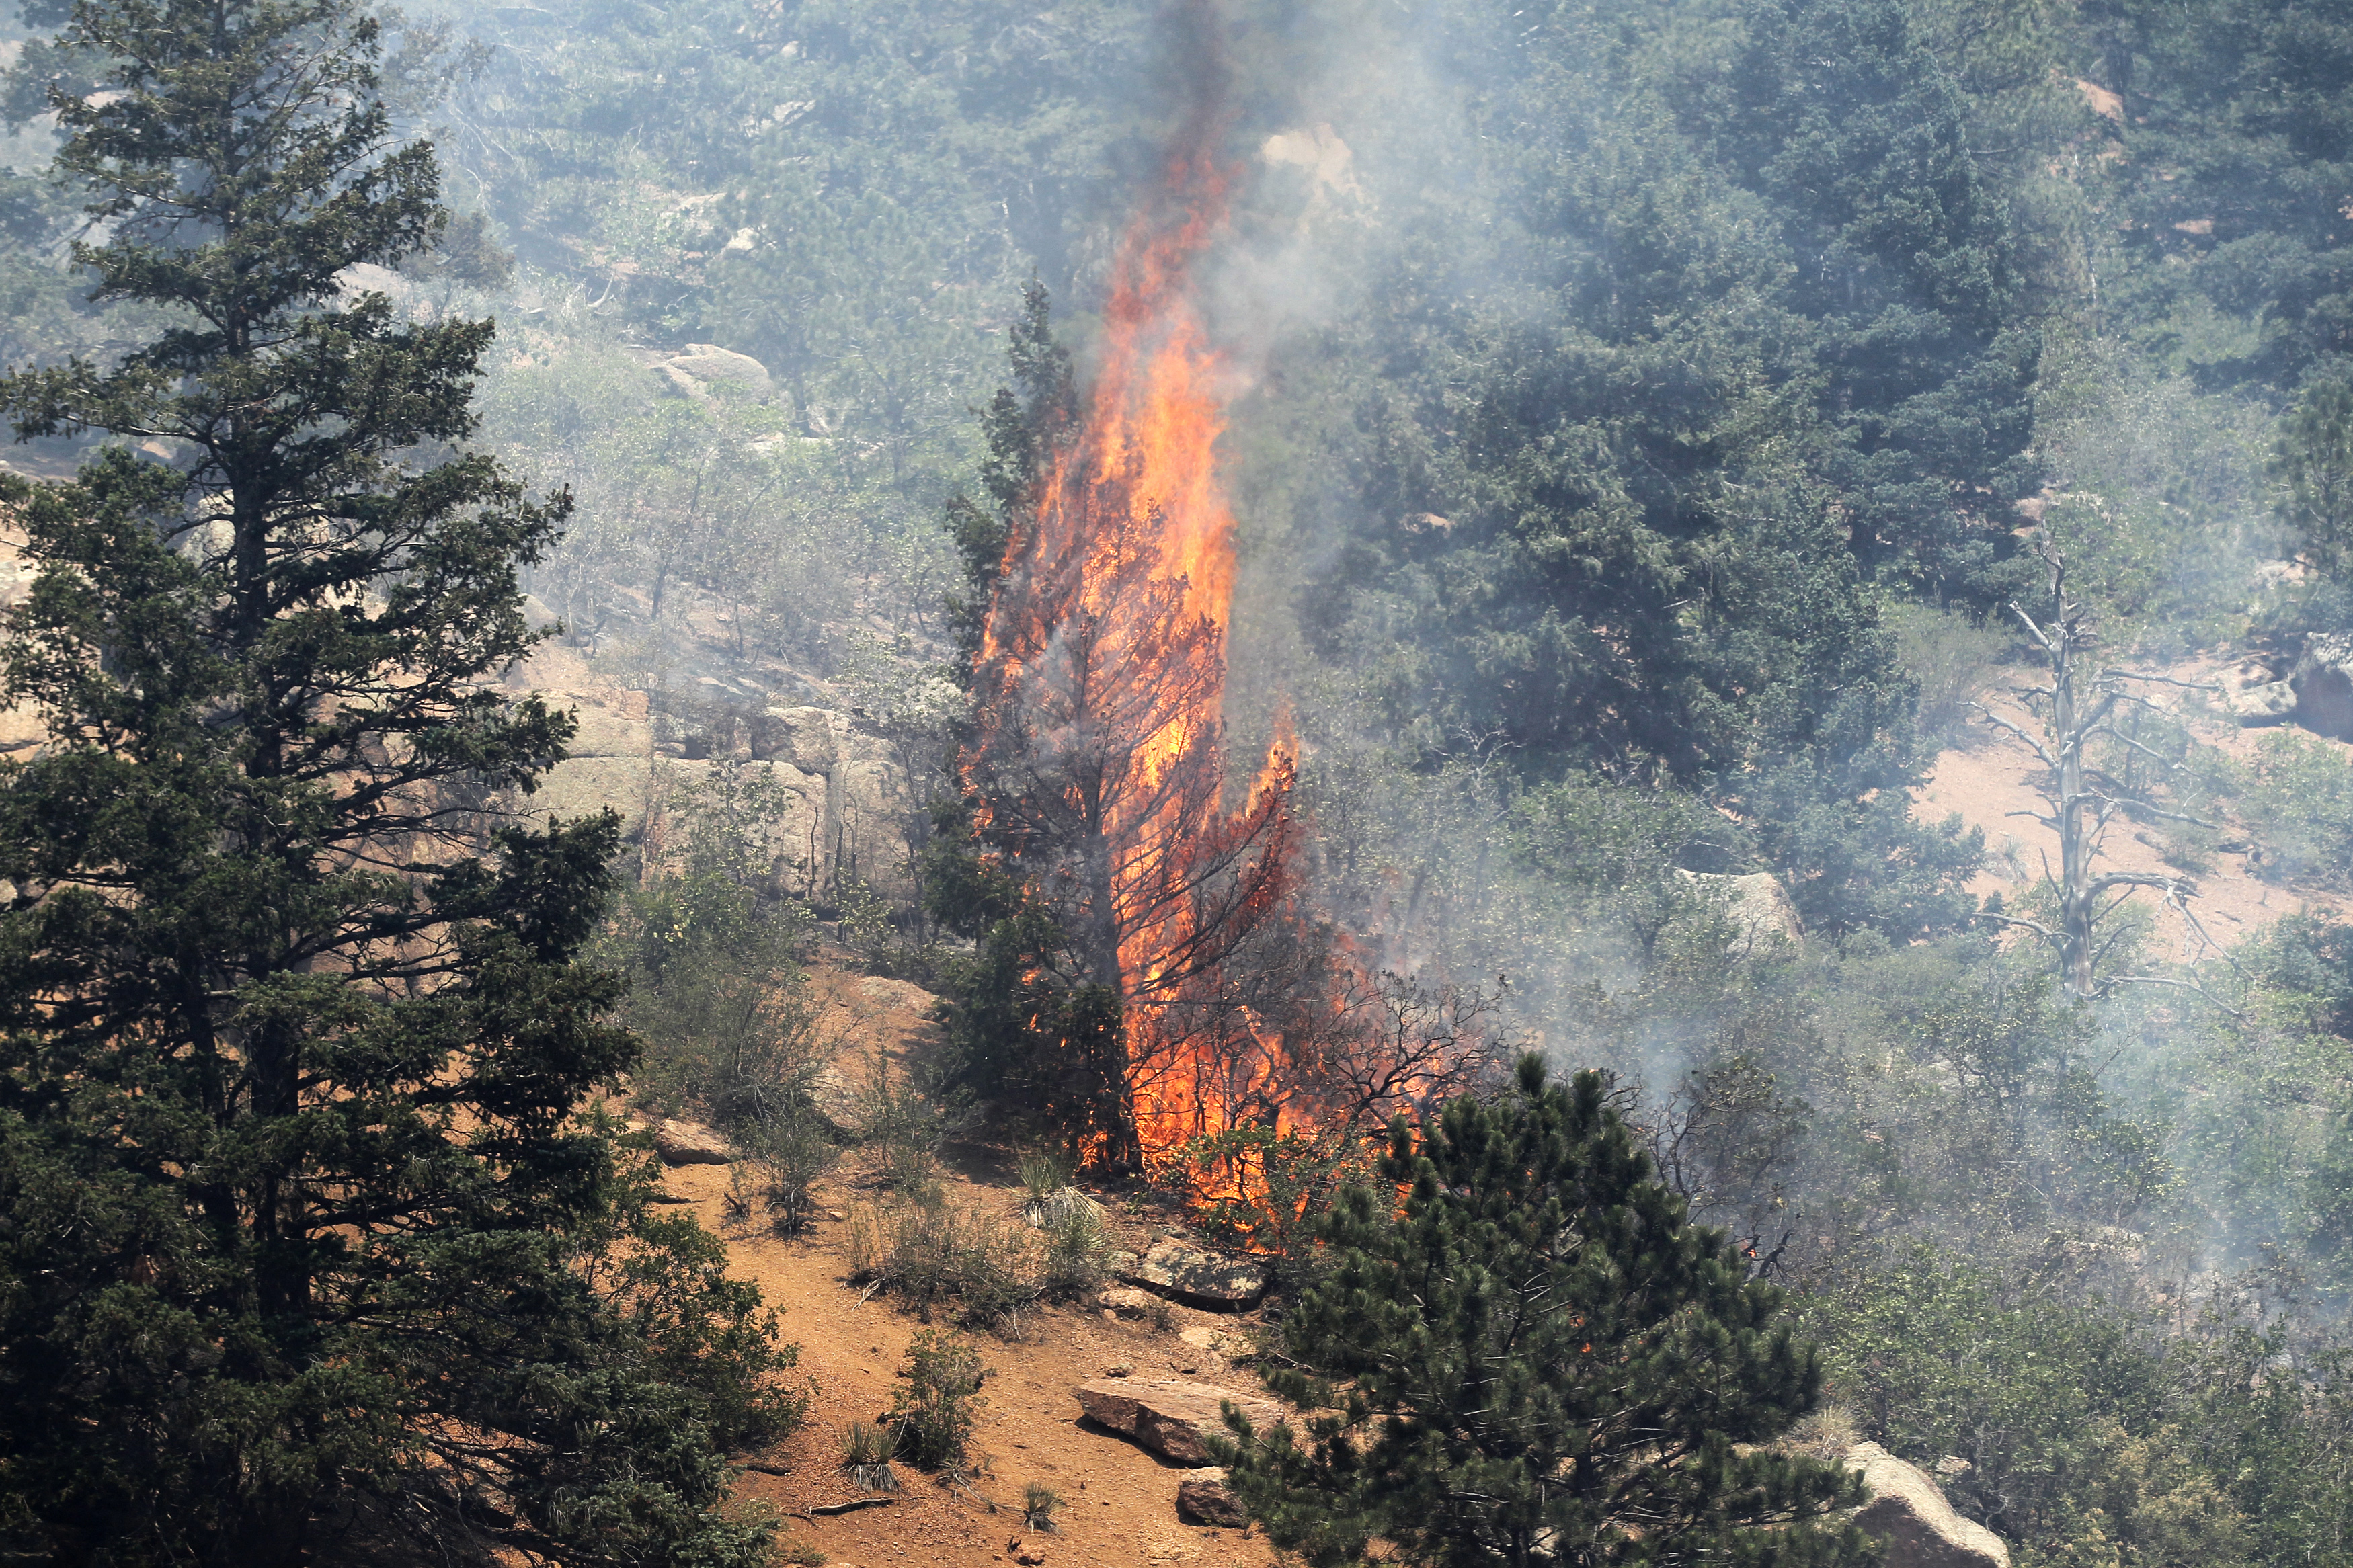 A tree erupts into flames in the Waldo Canyon fire west of Colorado Springs